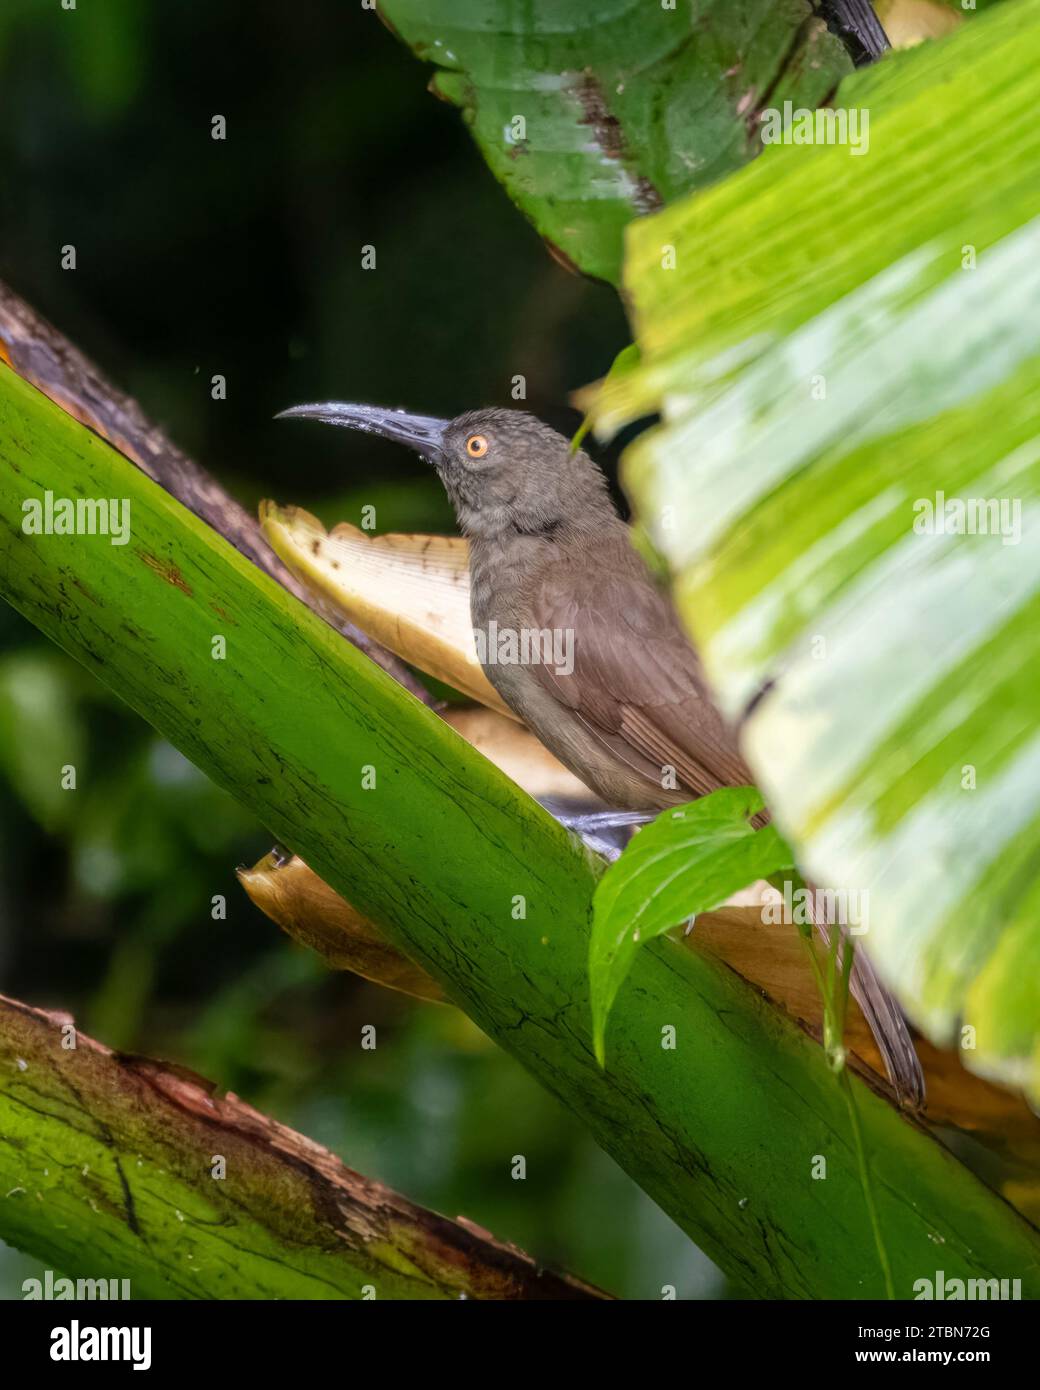 Long-billed honeyeater (Melilestes megarhynchus), a species of bird in the family Meliphagidae in Arfak Mountains, West Papua, Indonesia Stock Photo